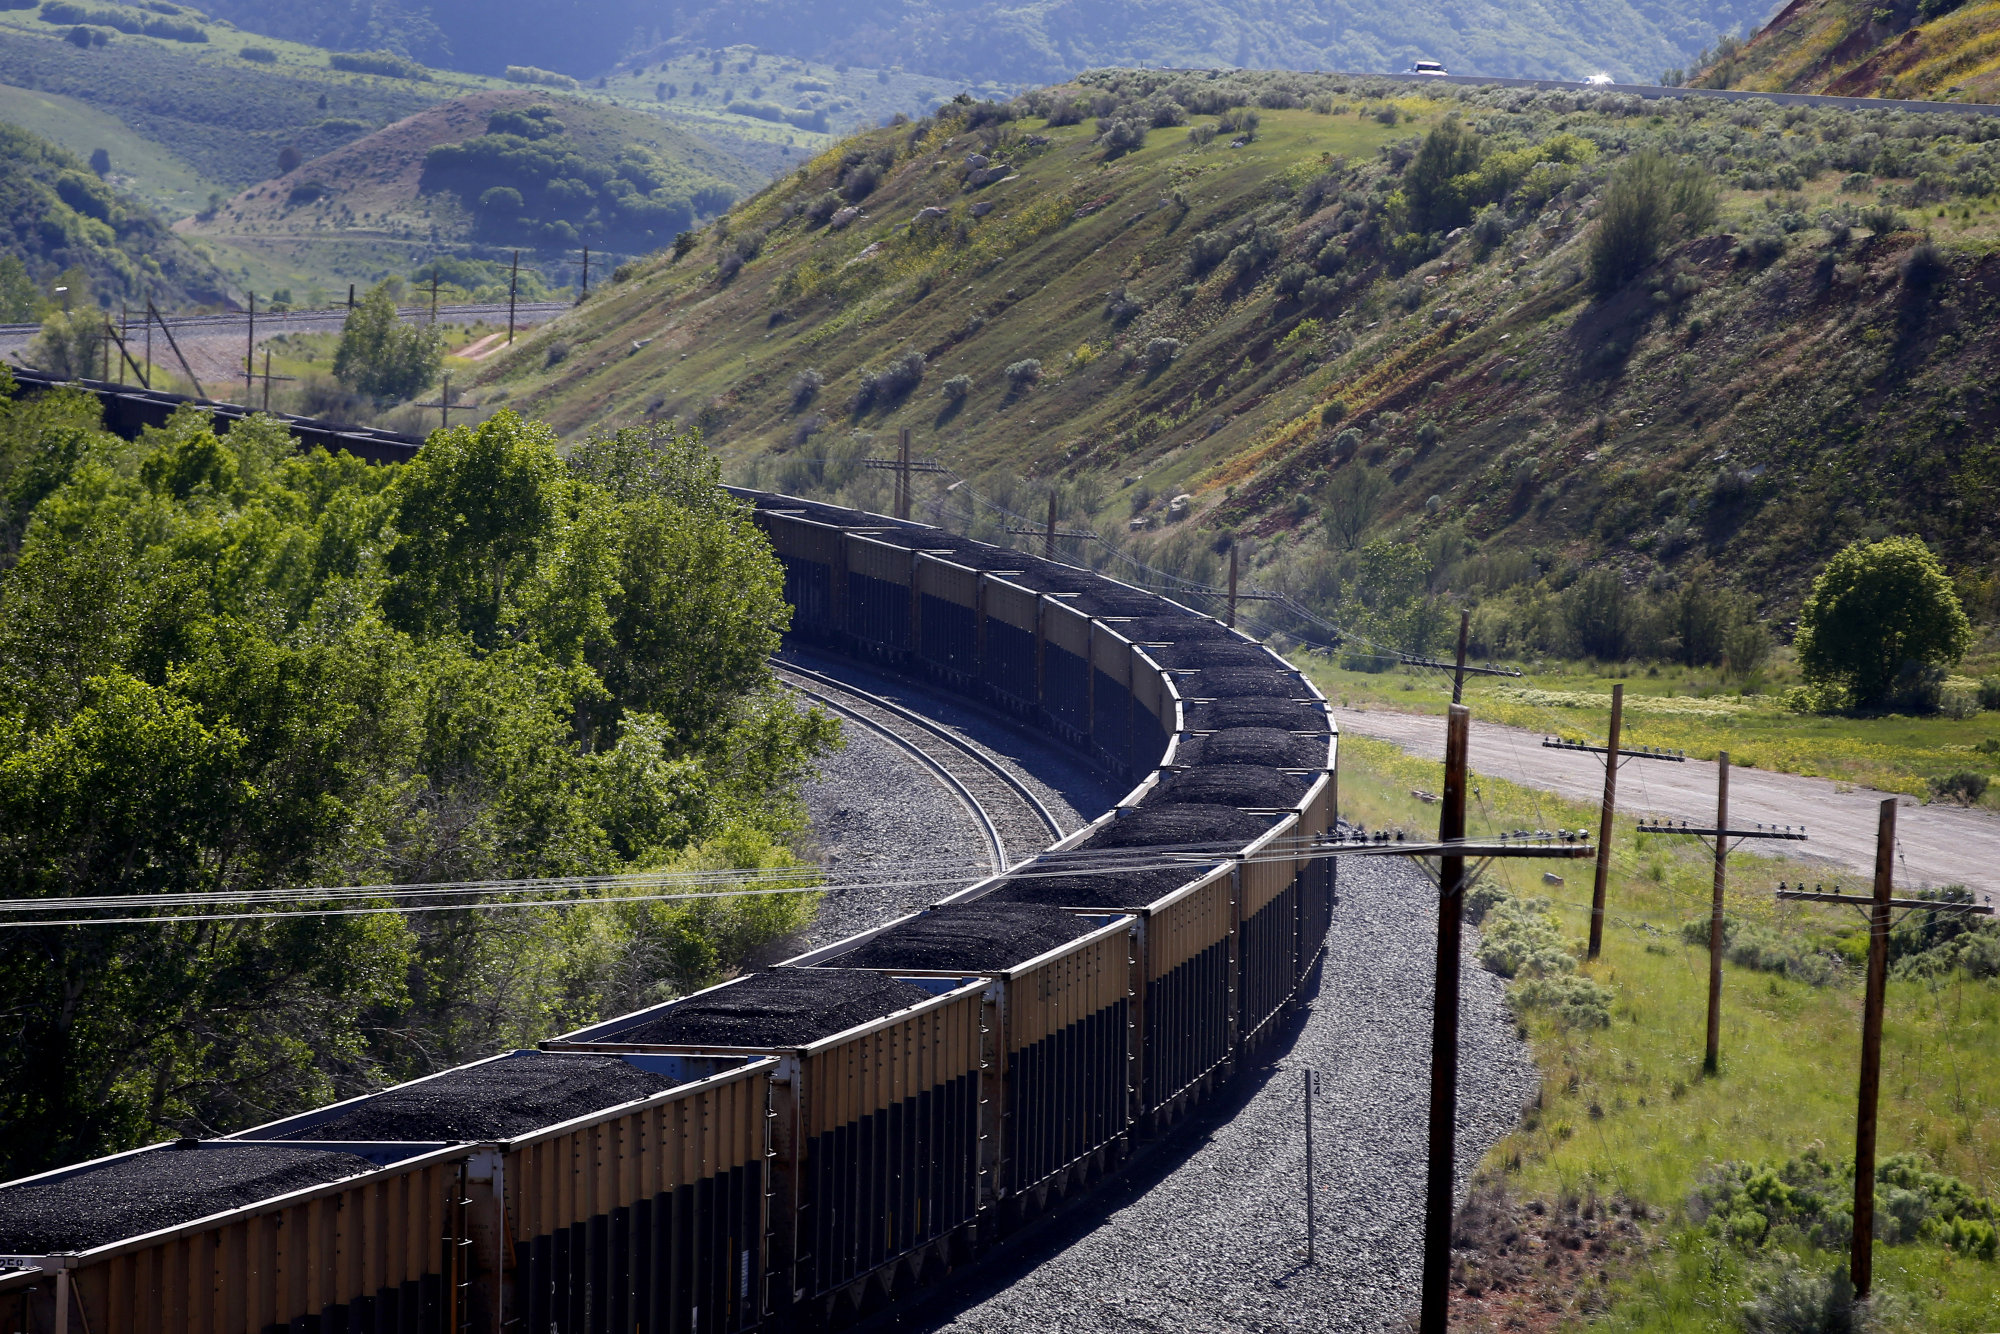 Coal Transport As Price Declines And U.S. Natural Gas Futures Reverse Gain